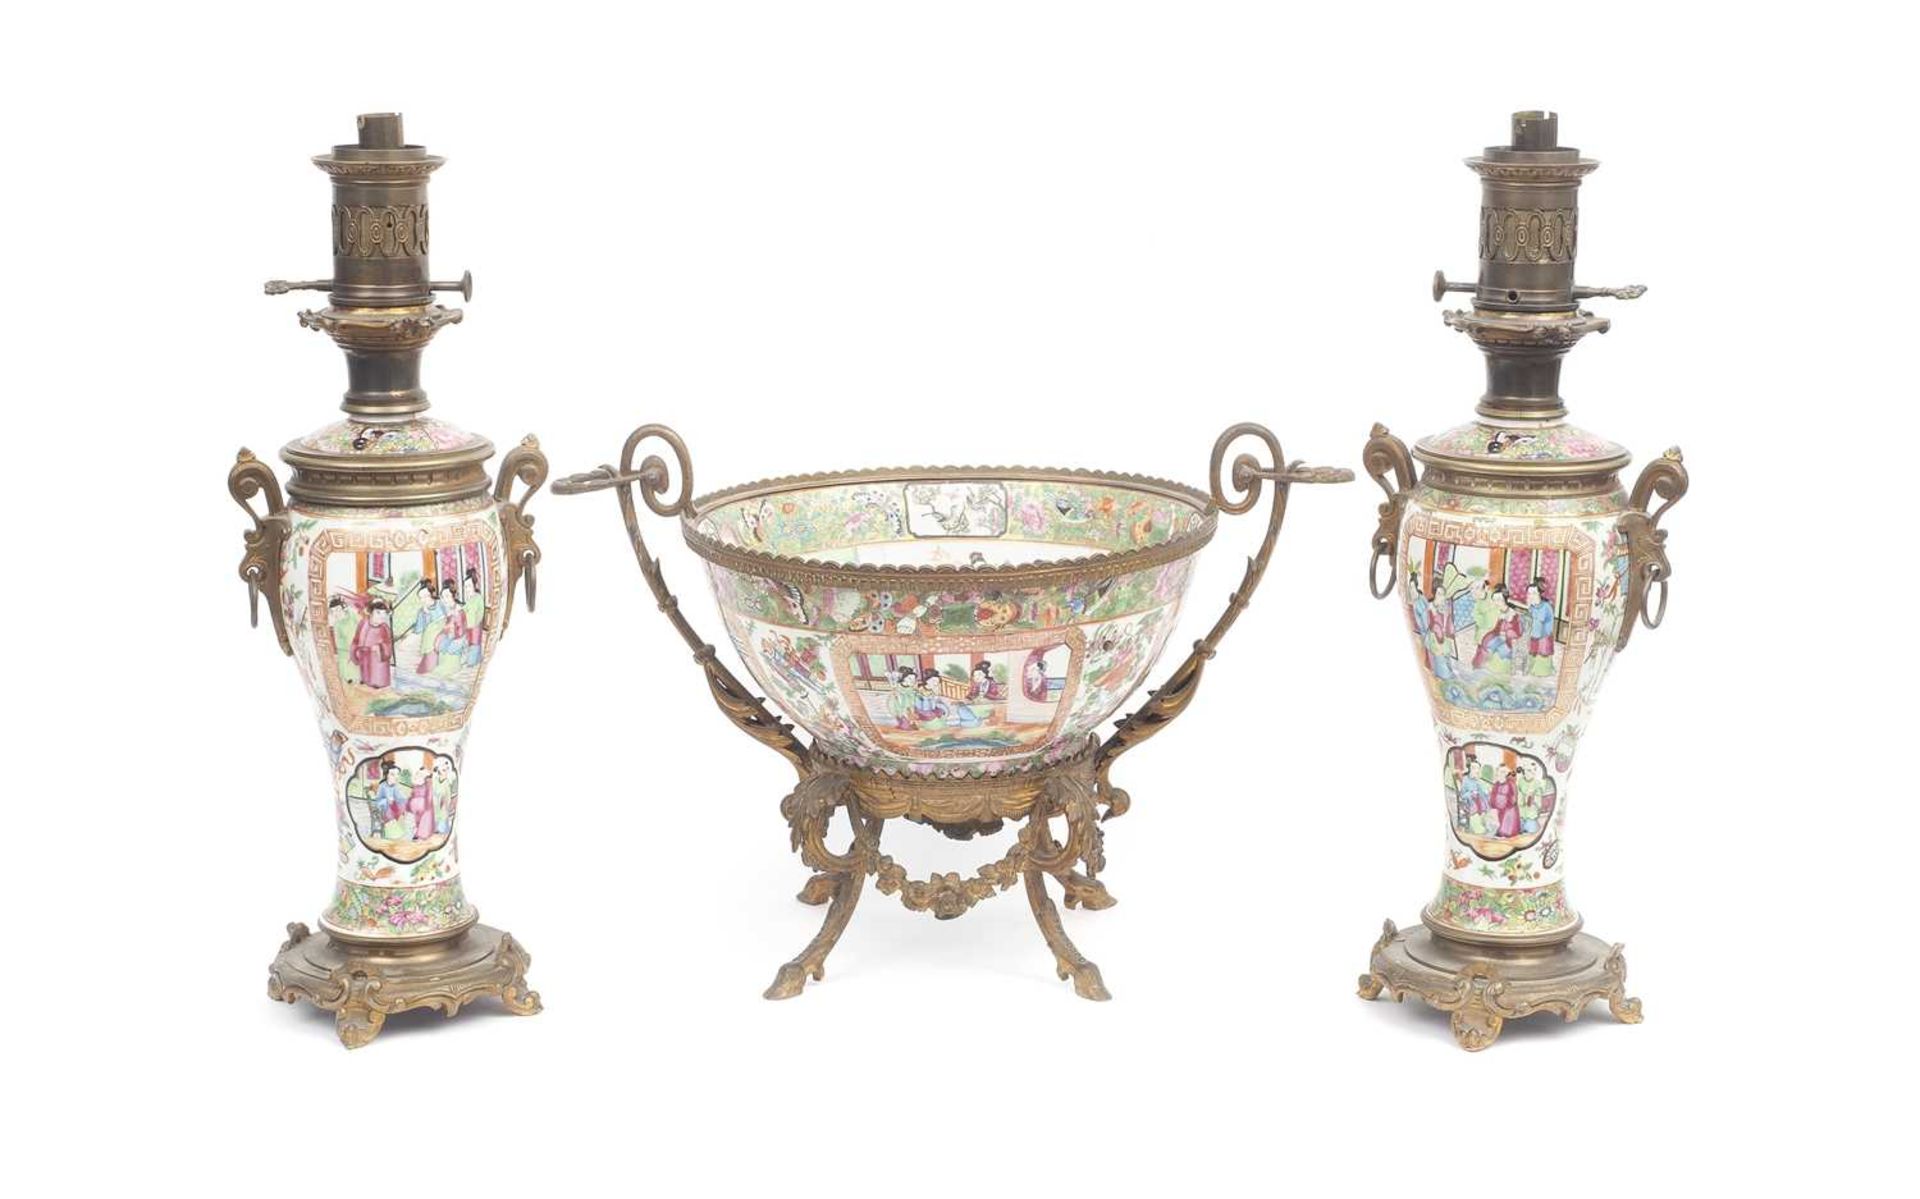 A PAIR OF 19TH CENTURY CHINESE PORCELAIN OIL LAMPS TOGETHER WITH A SIMILAR BOWL